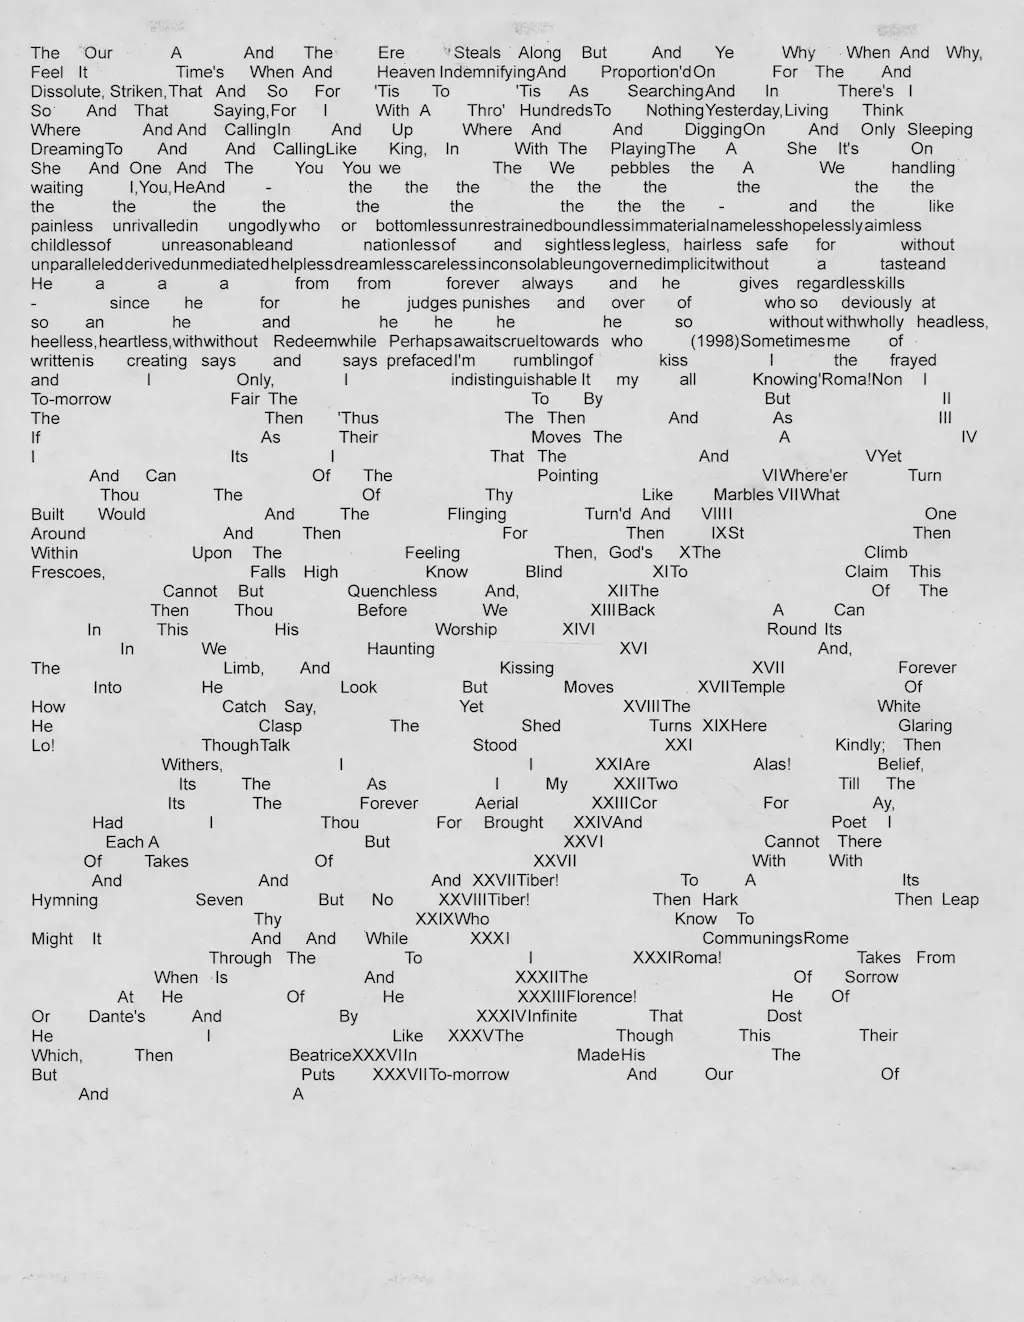 Poem generated using the Generative? Poems website, printed, and scanned.